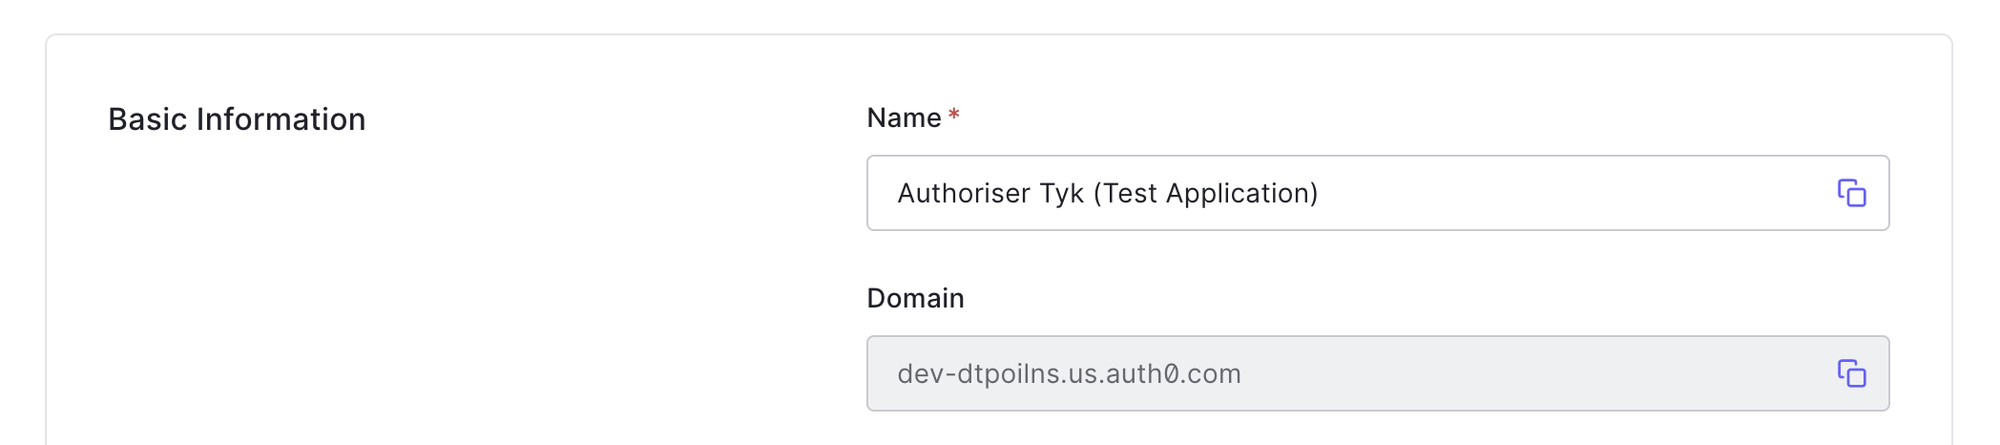 Auth0 Application Basic Information